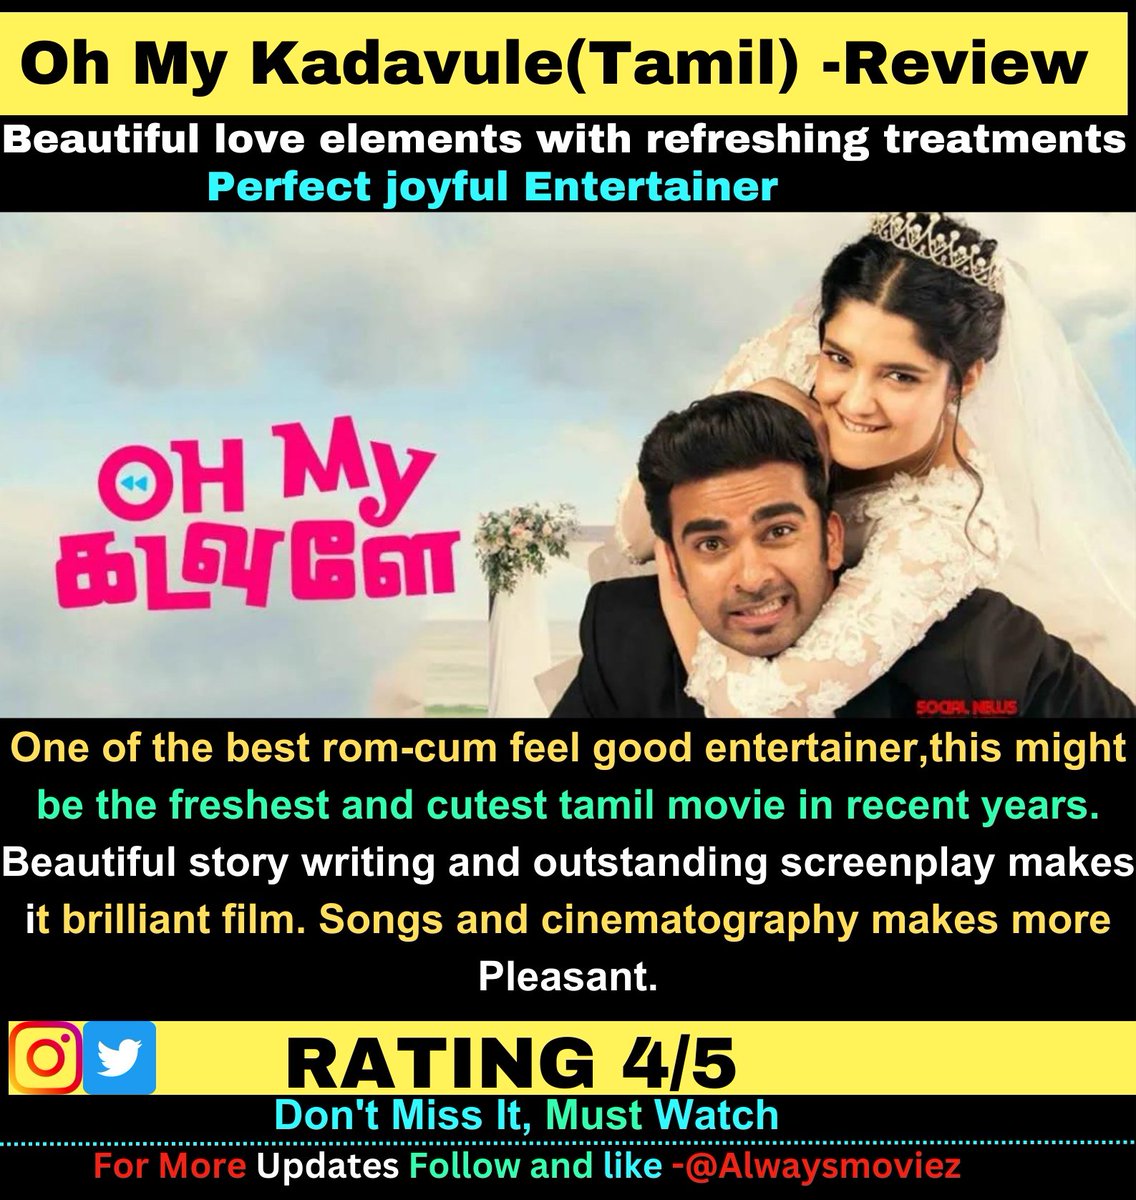 #OhMyKadavule-⭐⭐⭐⭐
Perfect joyful entertainer.

One of the best rom-cum feel good entertainer,this might be the freshest and cutest tamil movie in recent years. Beautiful story writing and outstanding screenplay makes it brilliant film.  
@AshokSelvan #RitikaSingh